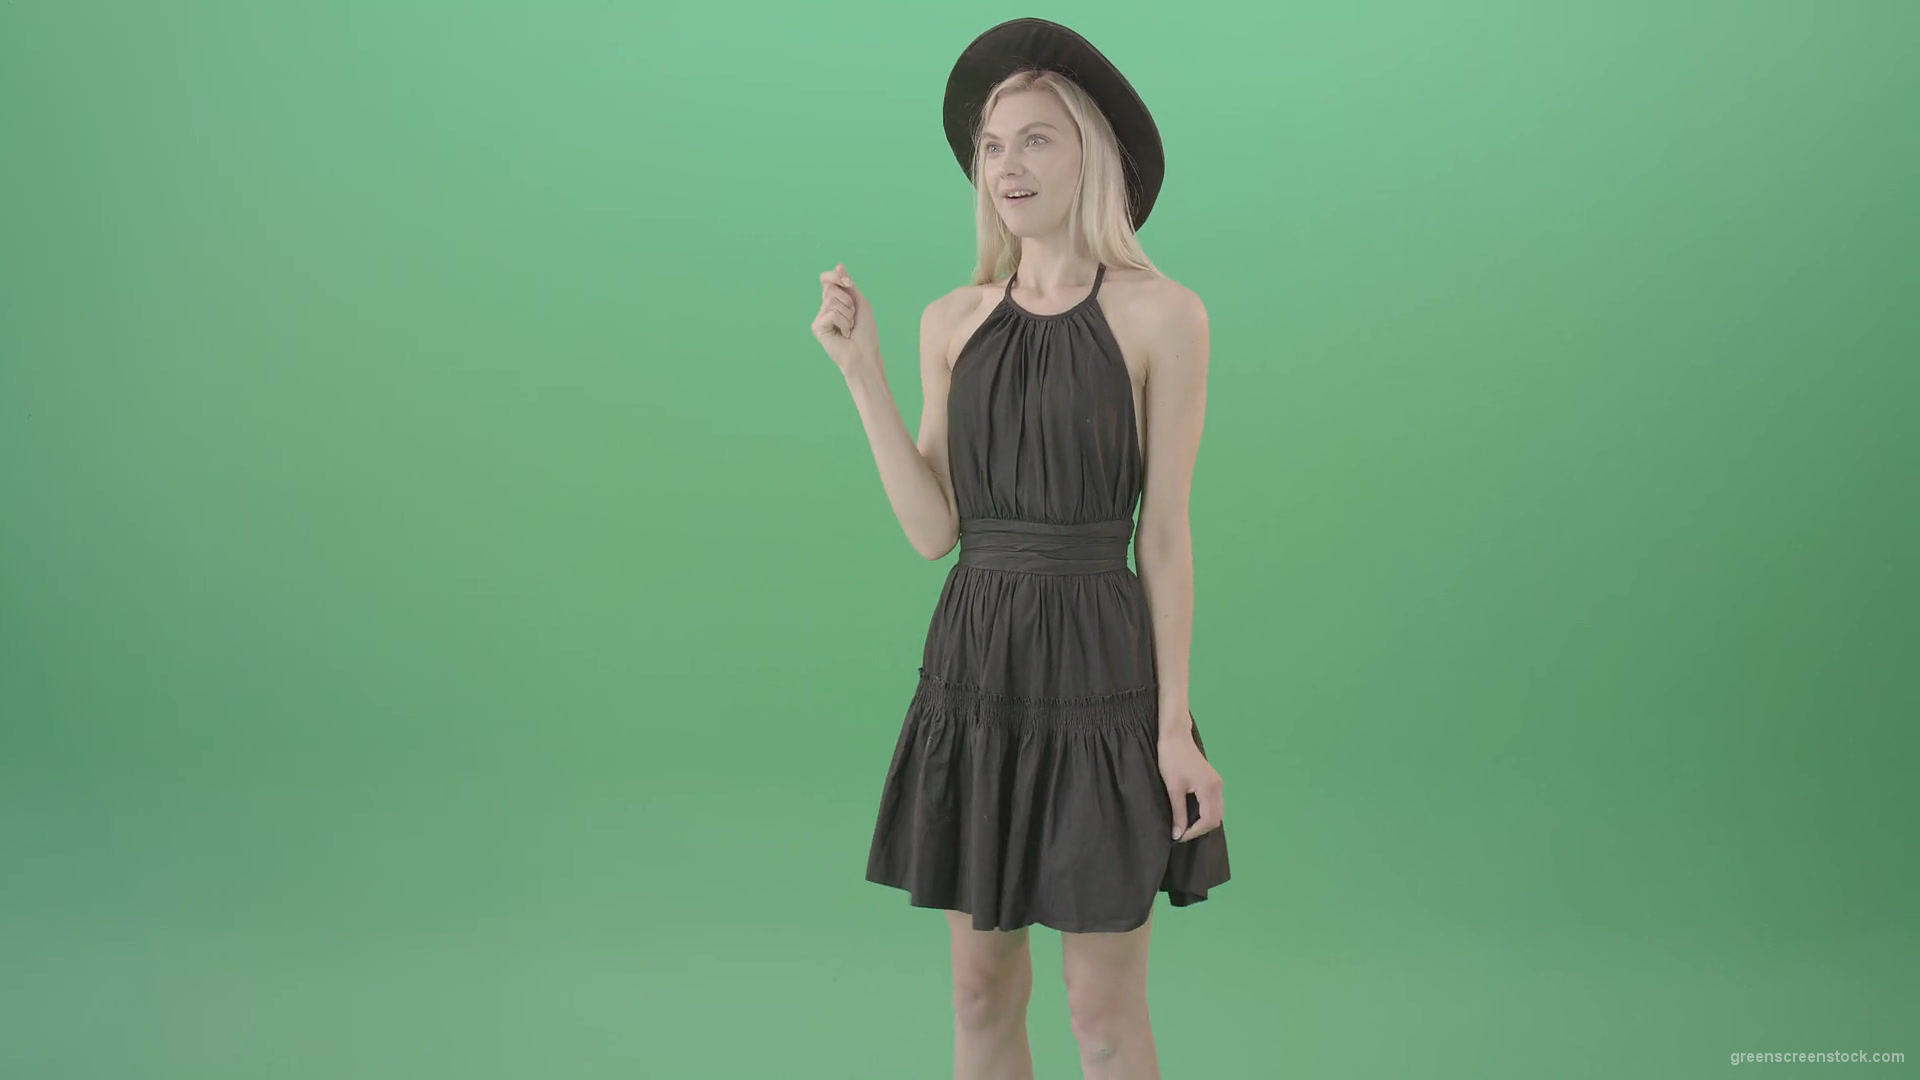 Happy-wow-effect-blonde-girl-slides-products-on-internet-on-touch-screen-4K-Green-Screen-Video-Footage-1920_005 Green Screen Stock